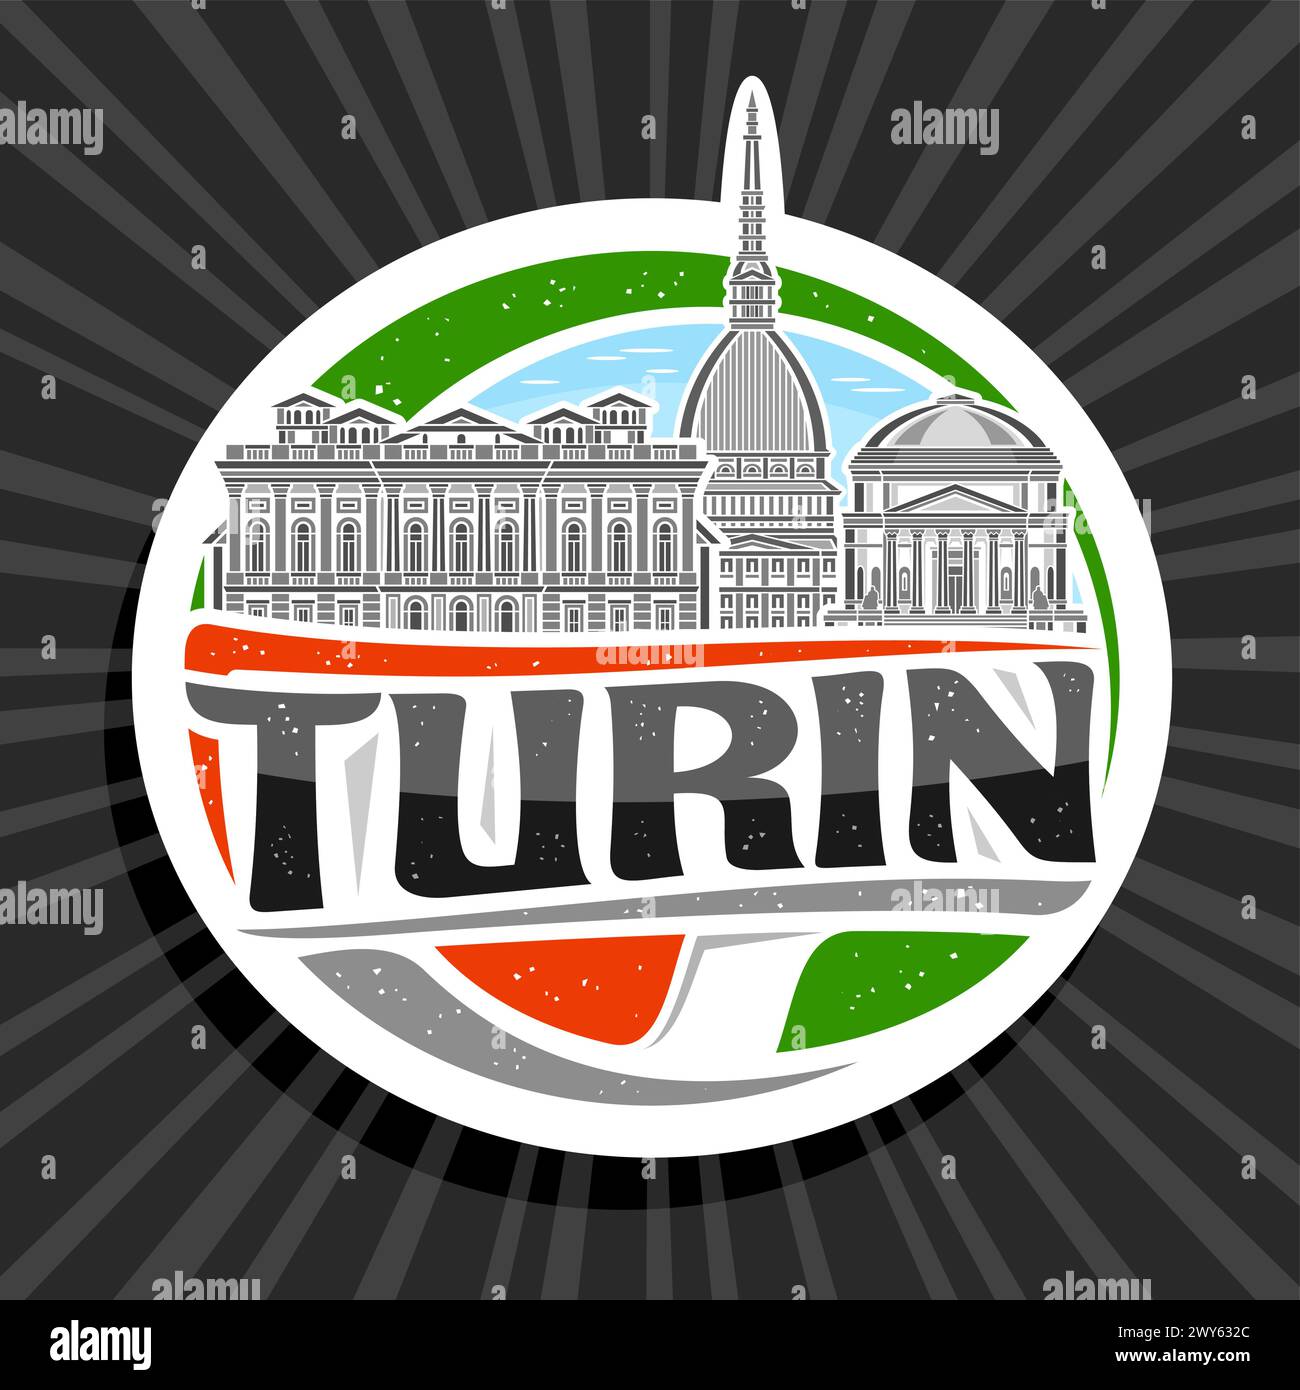 Vector logo for Turin, white decorative tag with outline illustration of famous turin city scape on day sky background, art design circle refrigerator Stock Vector